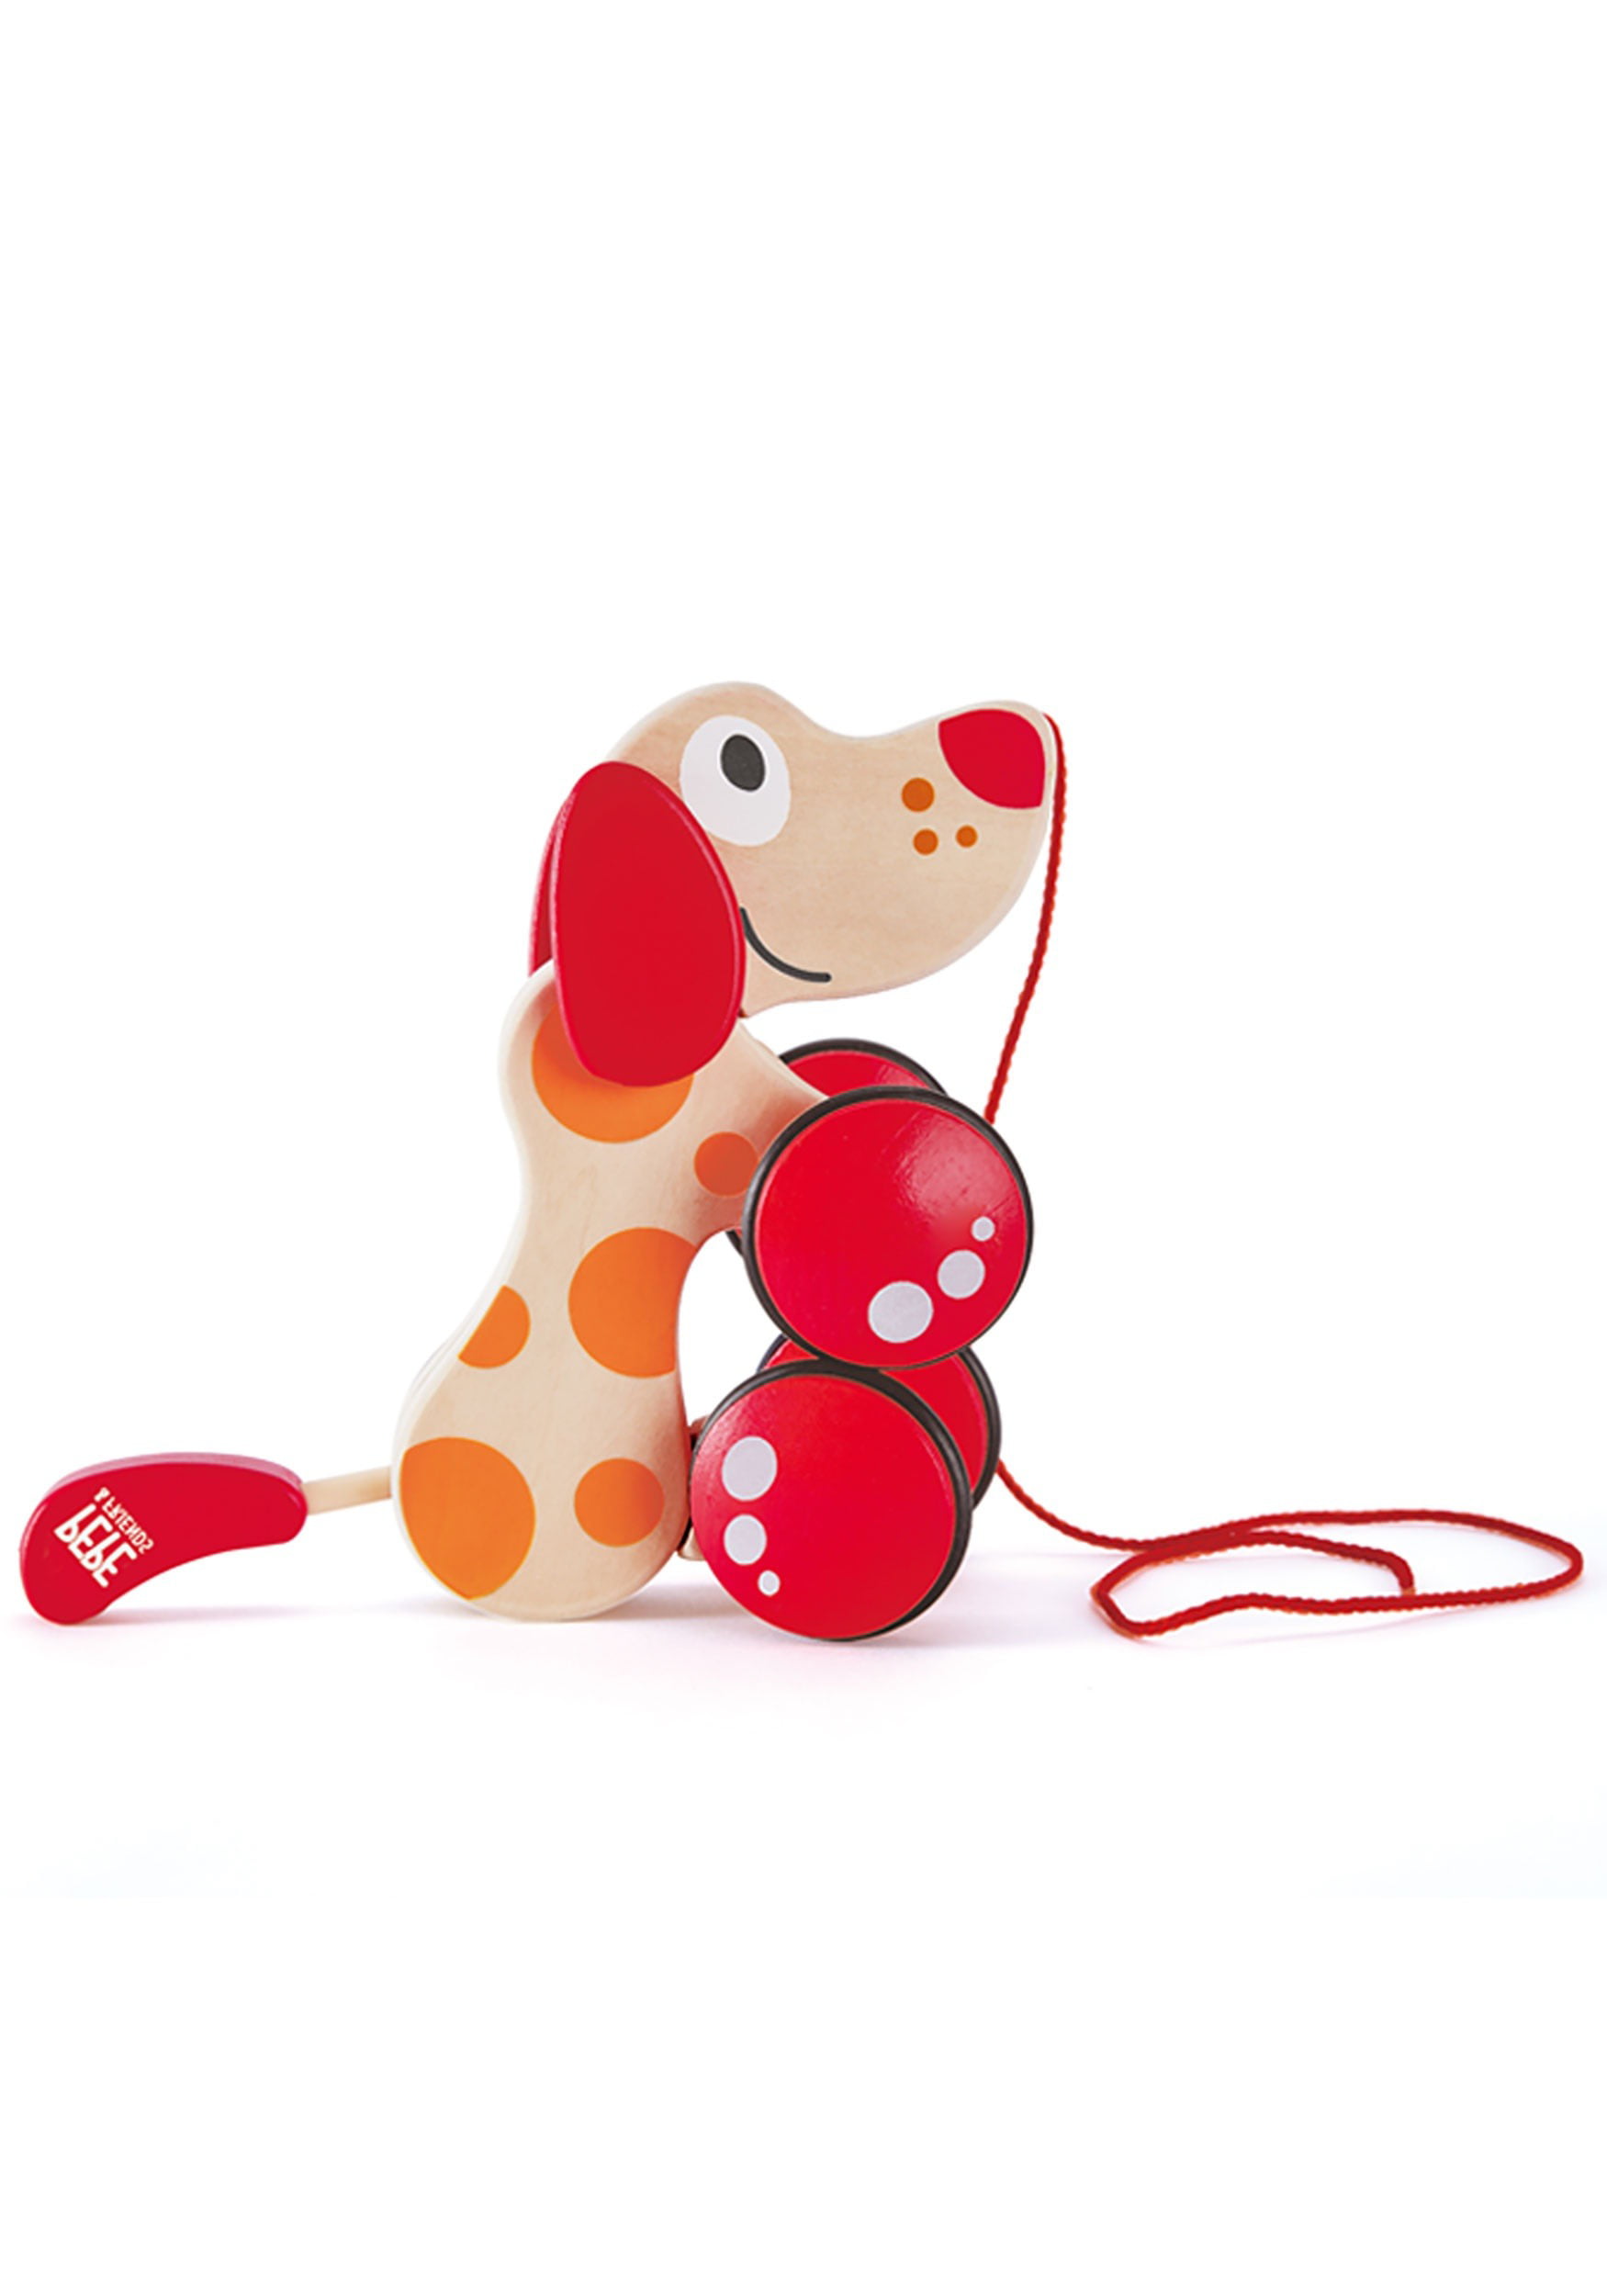 Hape Elephant Wooden Push and Pull Toddler Toy E0908 for sale online 